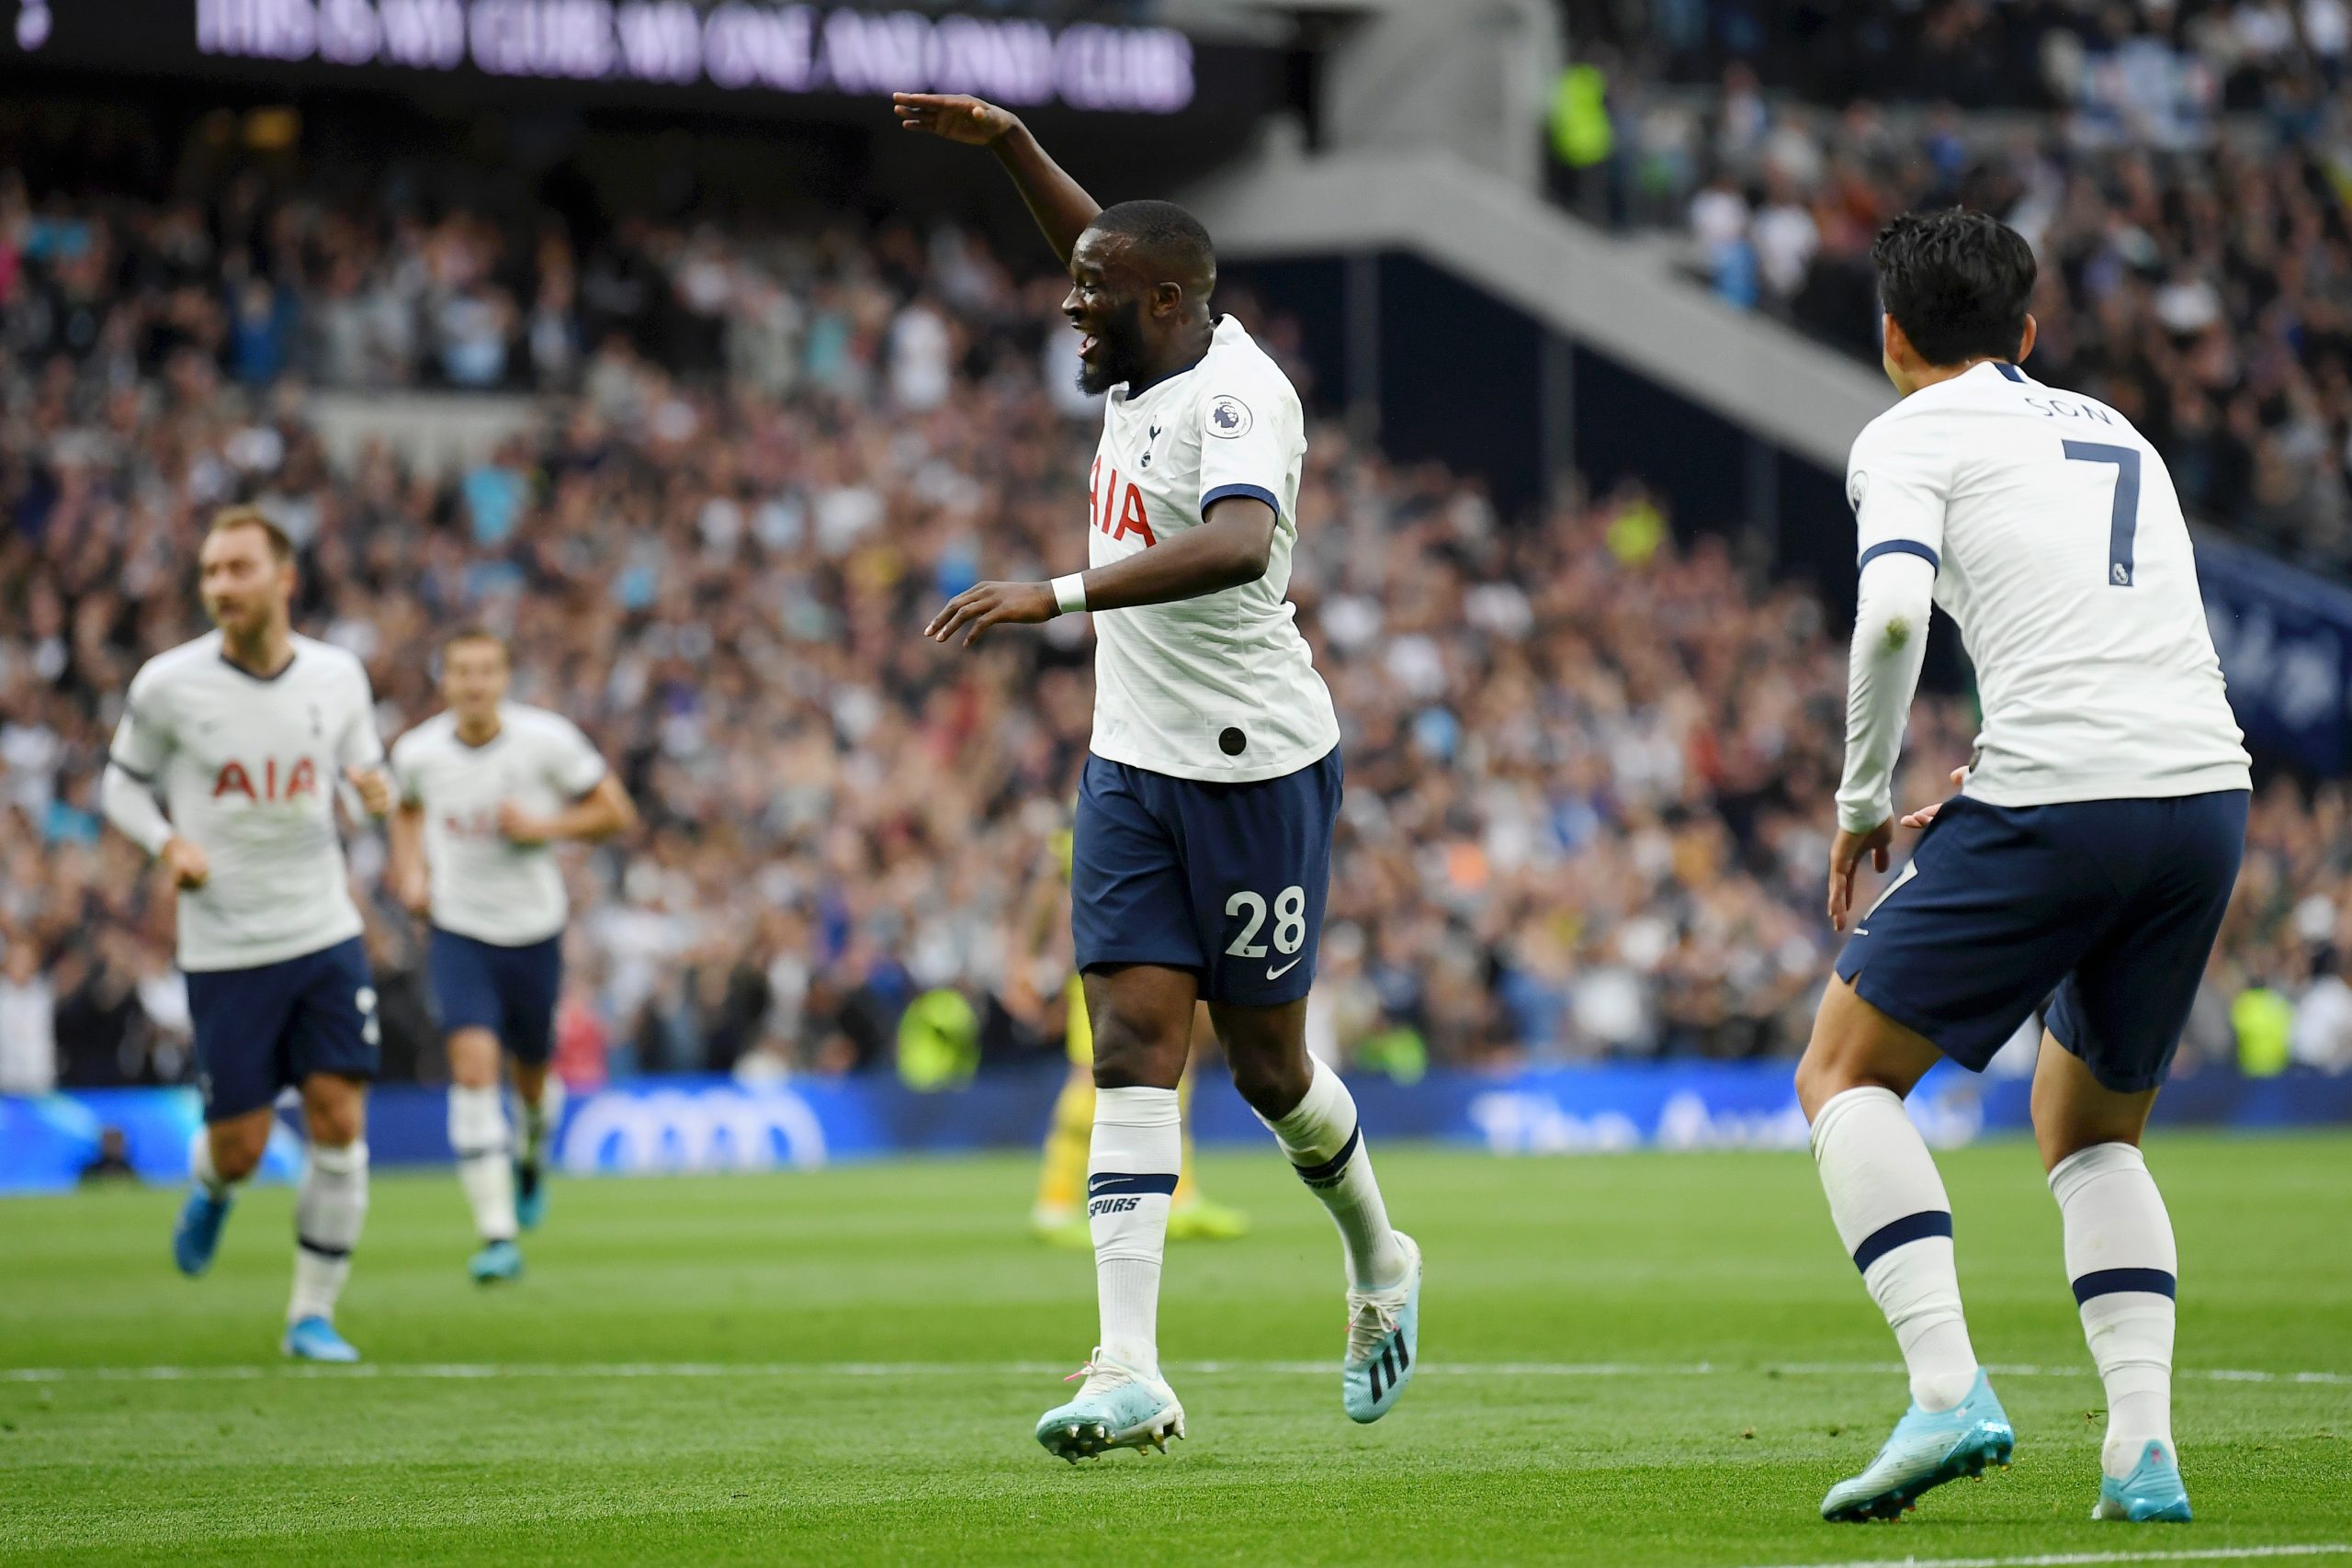 Tottenham Hotspur not willing to sanction the exit of Tanguy Ndombele who is in action in the photo